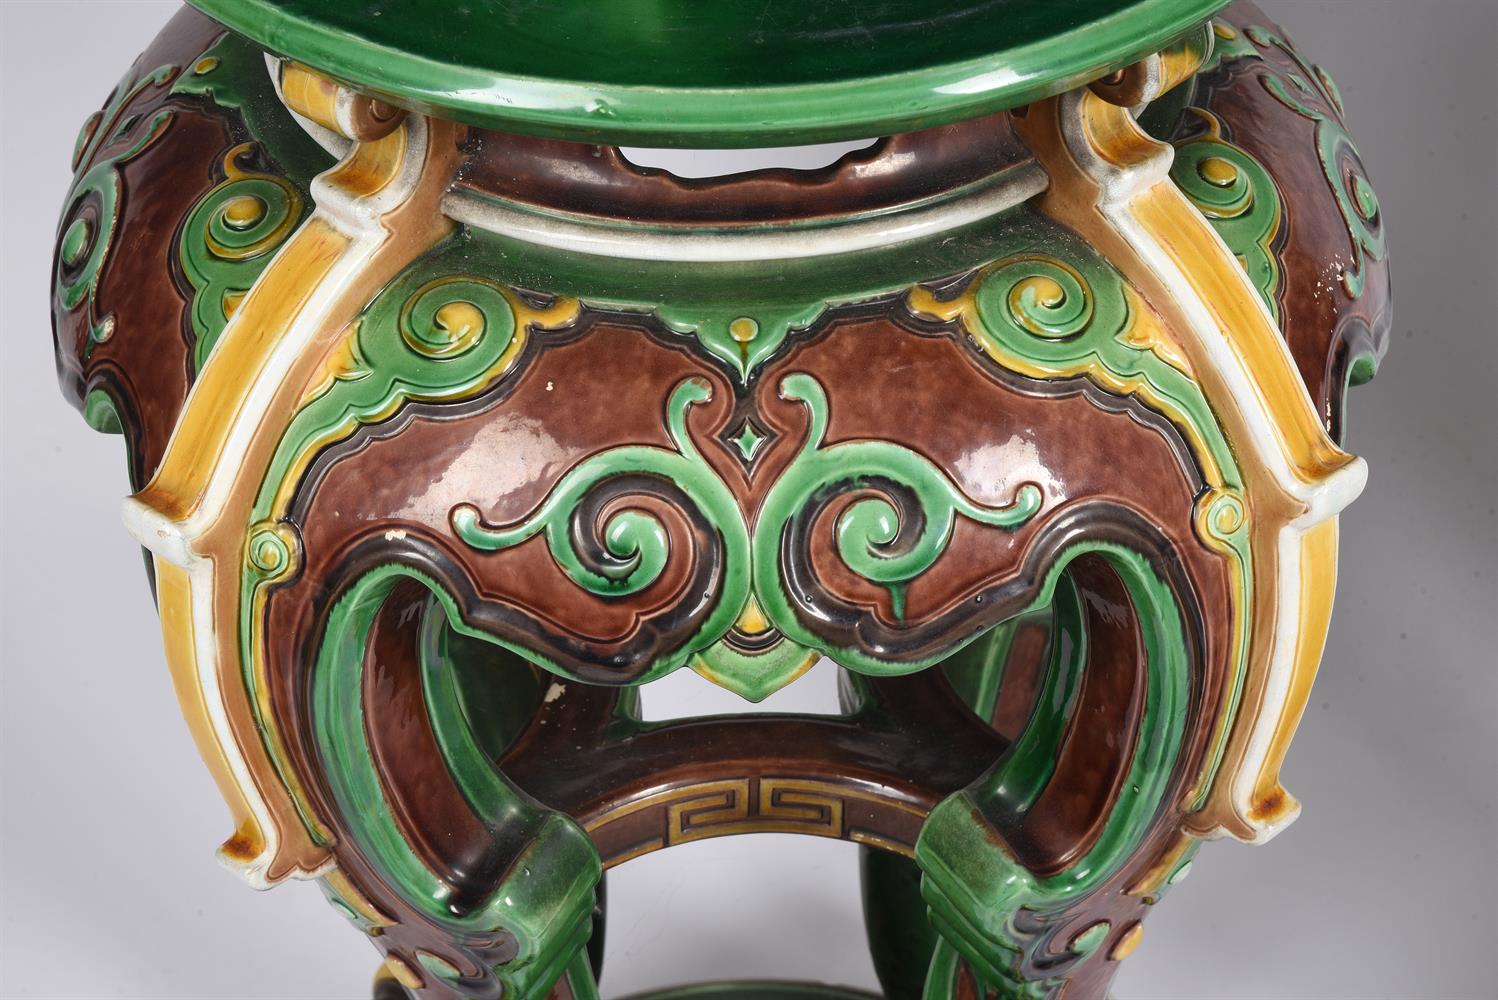 A PAIR OF MINTON MAJOLICA CHINOISERIE PEDESTALS ON STANDS - Image 3 of 4